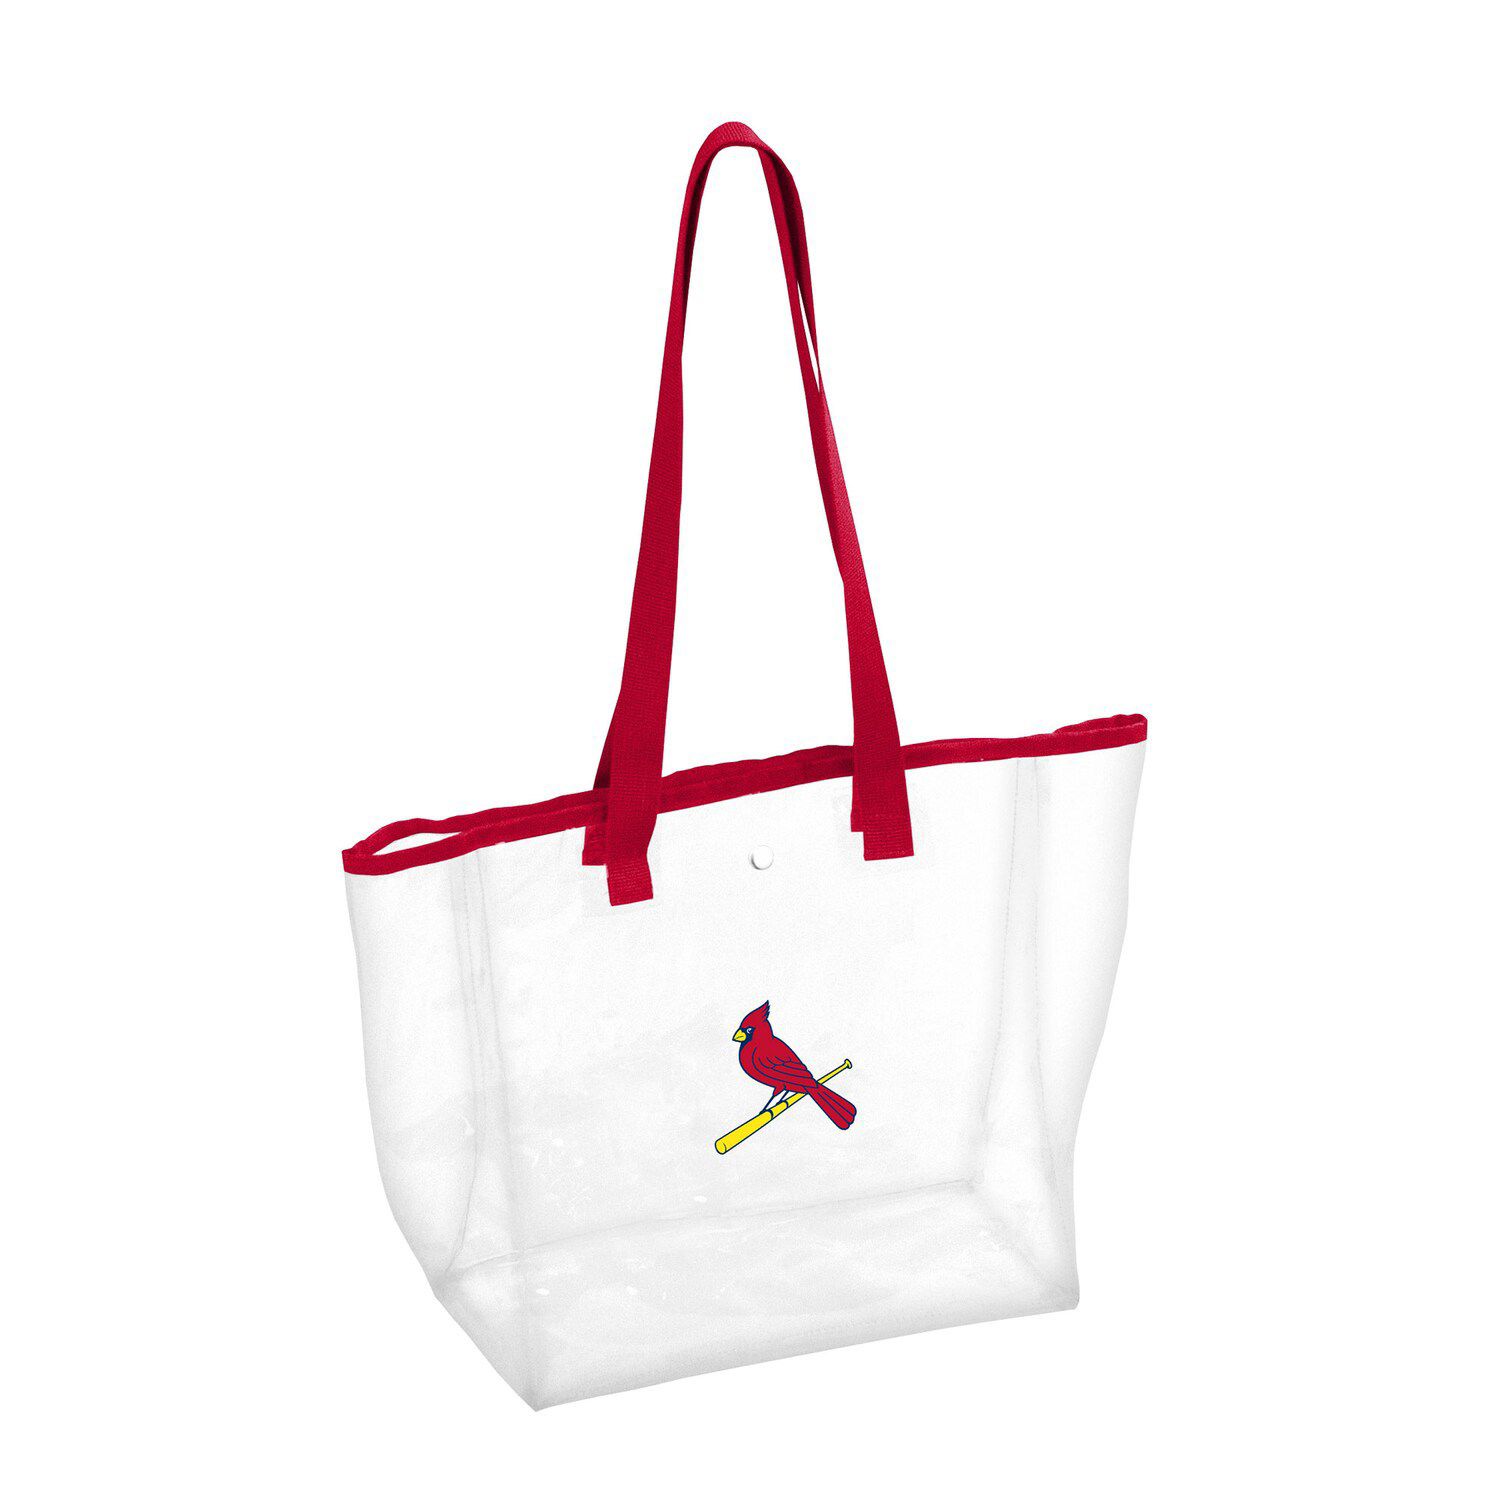 Juvale 2 Pack Clear Stadium Approved Tote Bags,12x6x12 Large Transparent Totes With Zippers,handles For Concerts,sporting Events,music